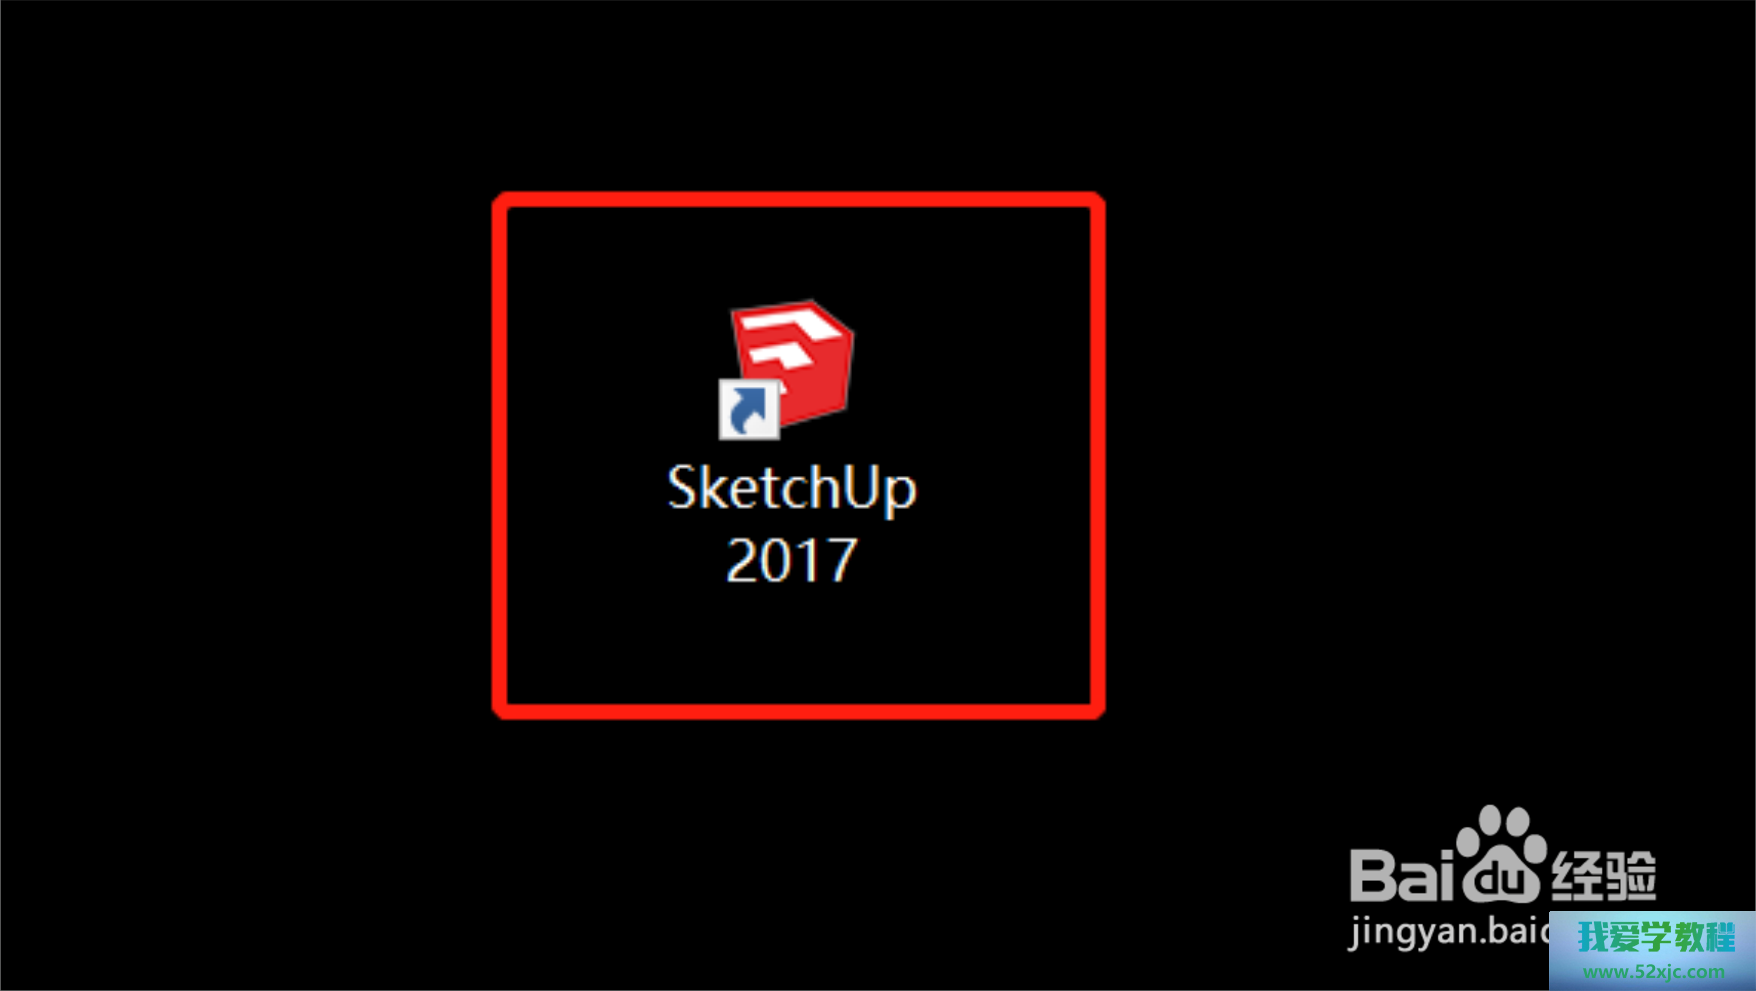 SketchUp里工具按钮怎么不显示名字和提示了？